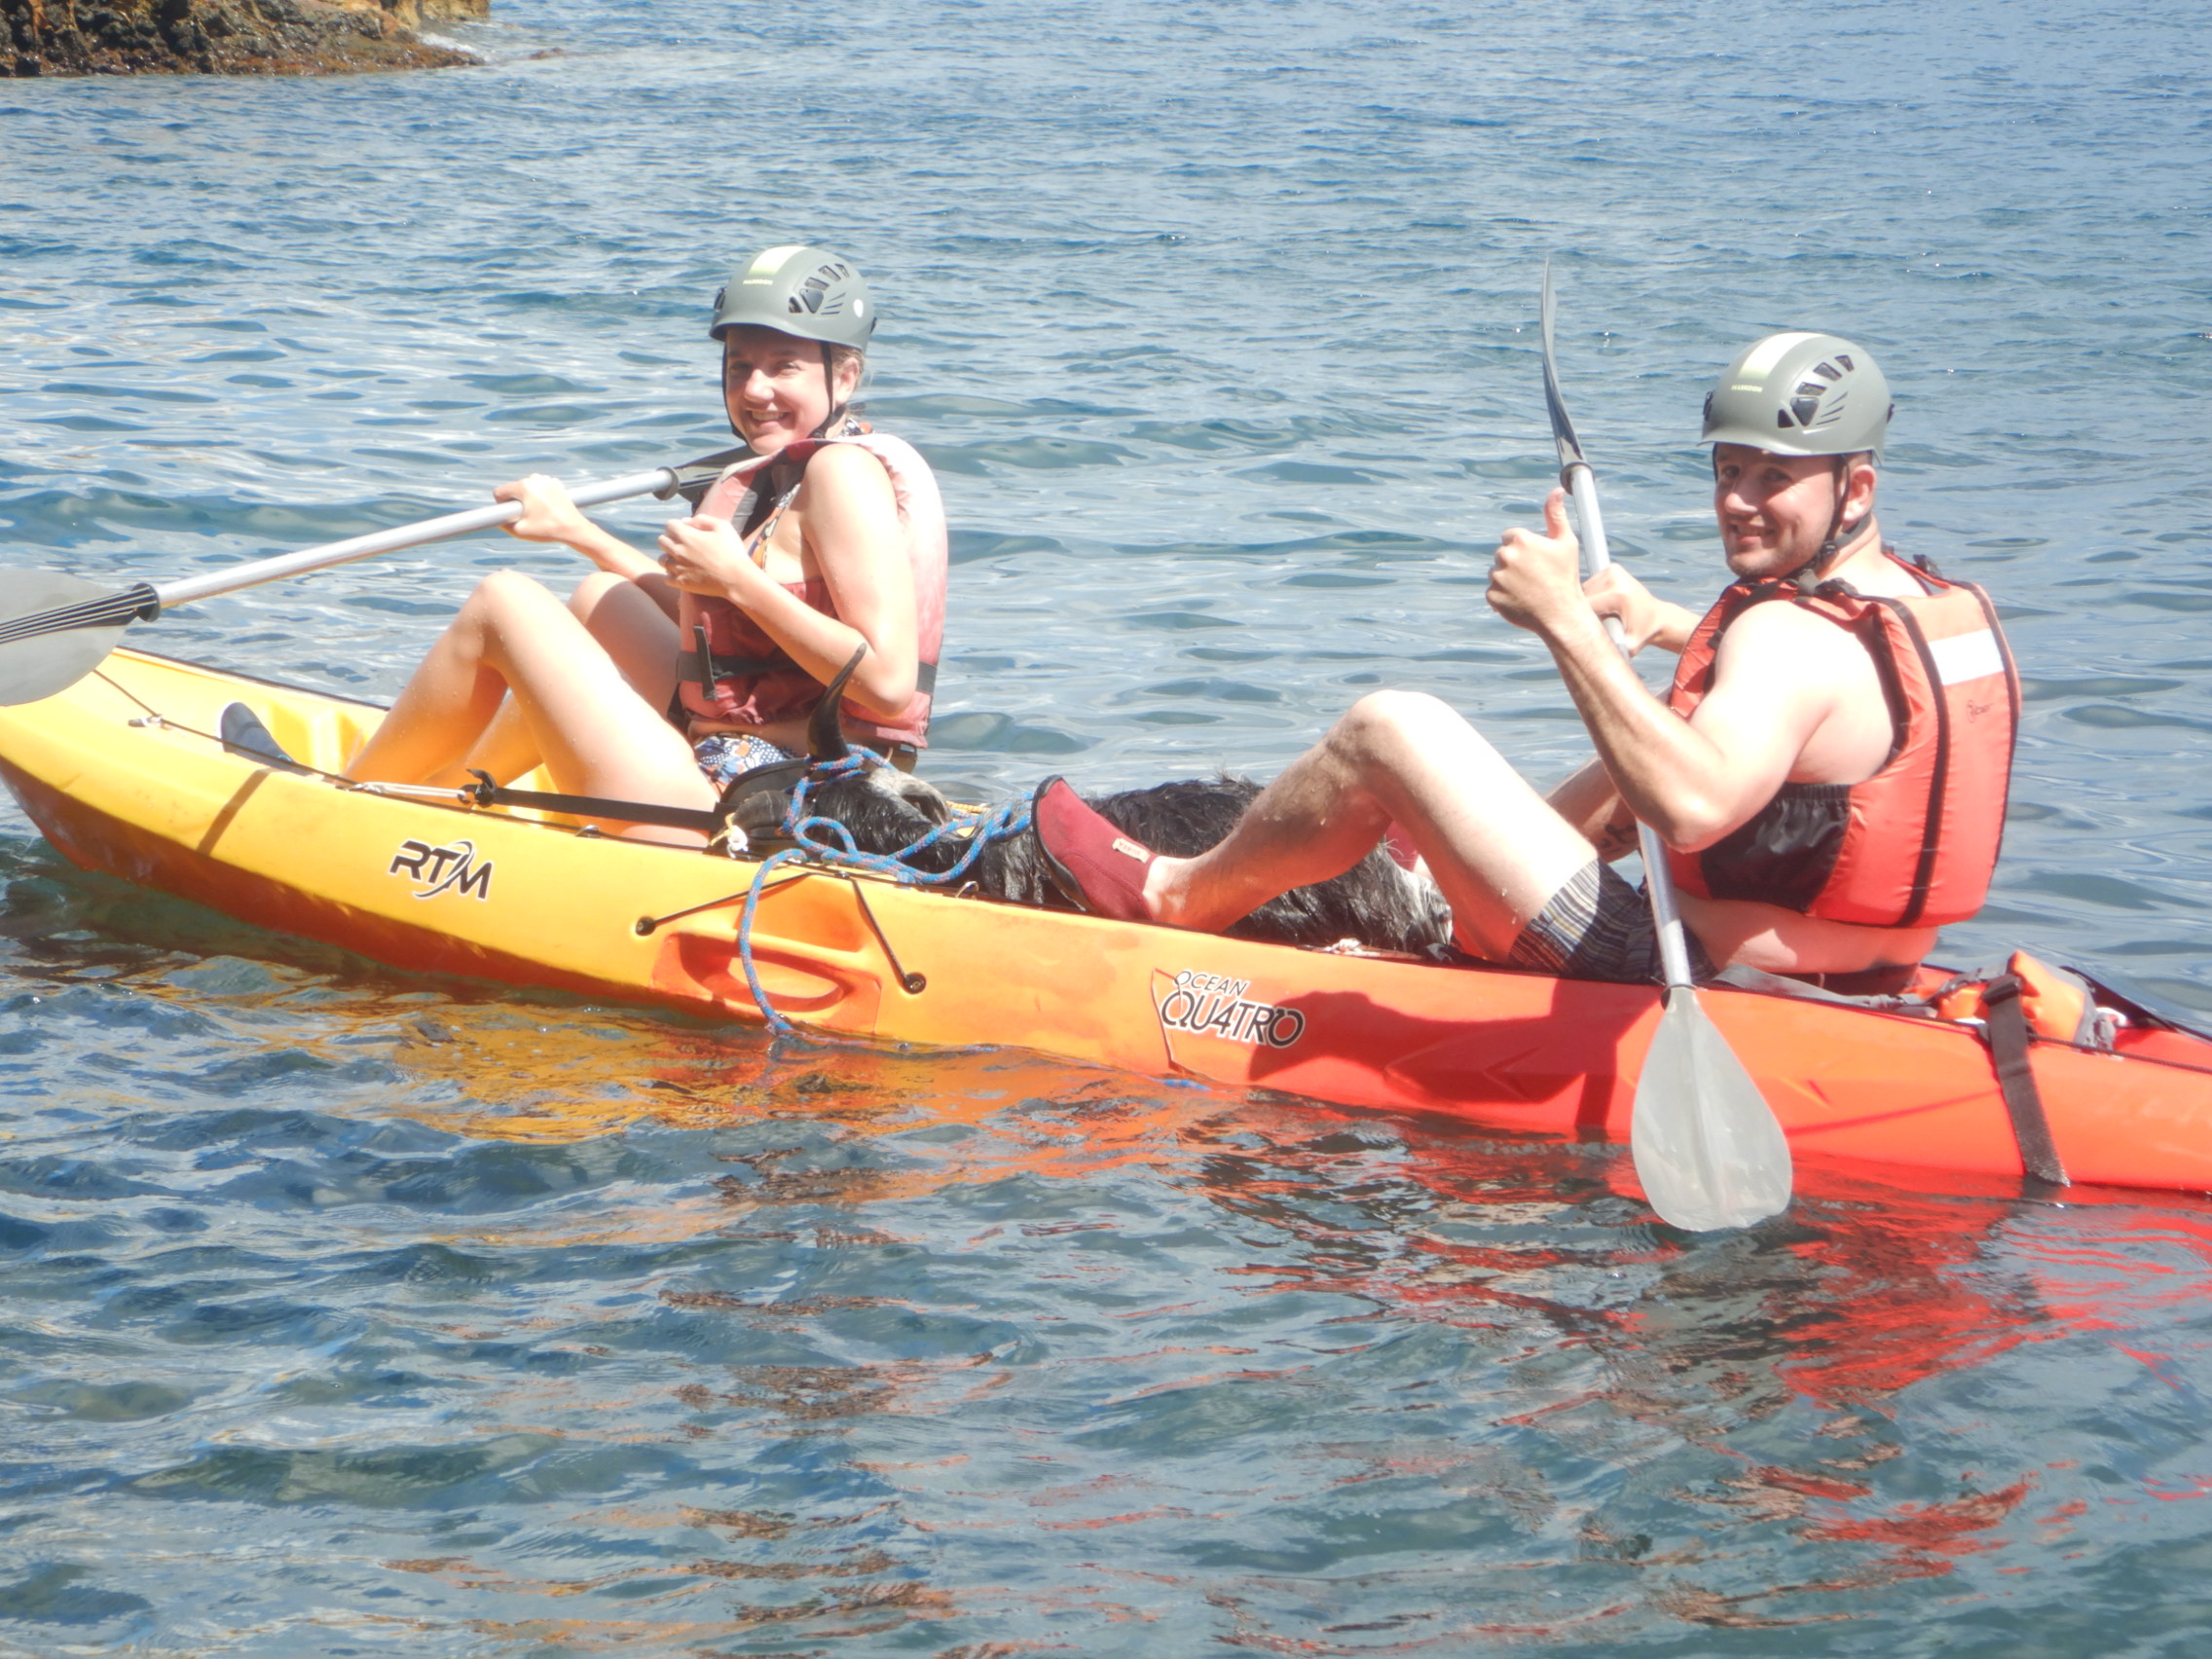 Daily guided excursions by Sit on Top Kayak + Coasteering Adventures to Aeolian Islands 